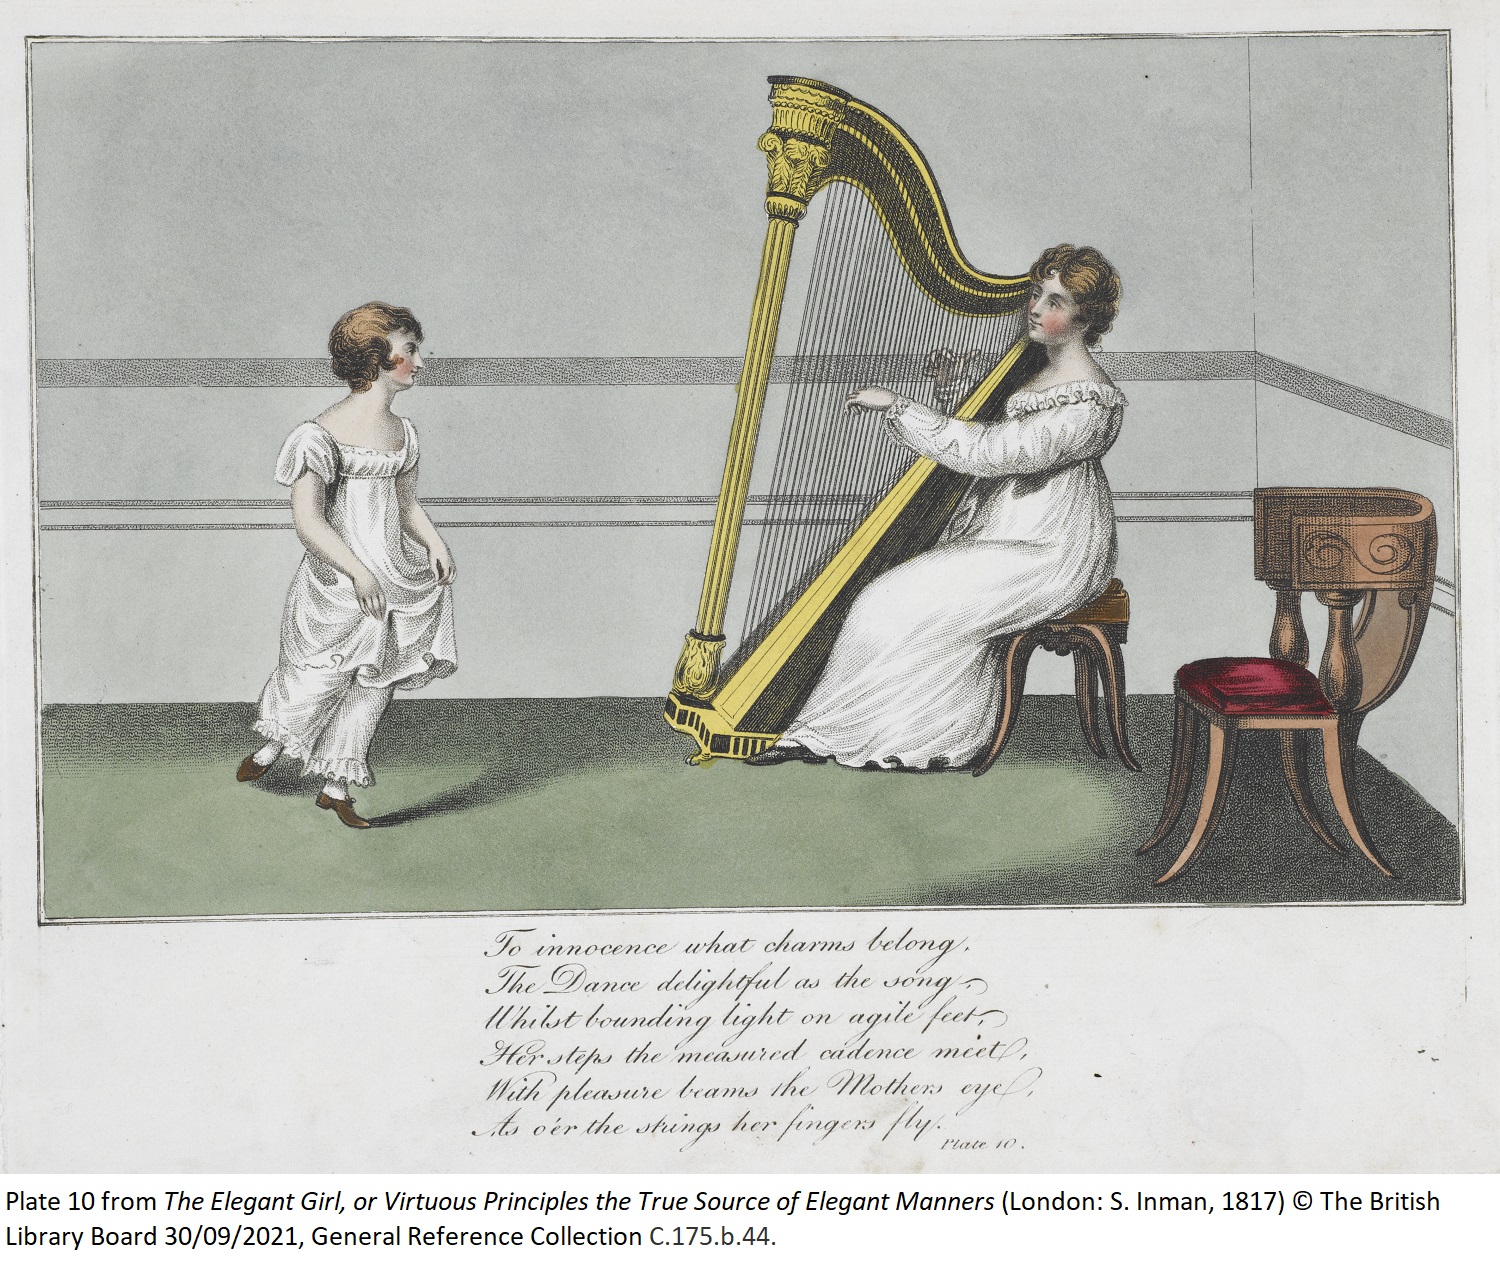 Plate 10 from The Elegant Girl, or Virtuous Principles the True Source of Elegant Manners (London: S. Inman, 1817) © The British Library Board 30/09/2021, General Reference Collection C.175.b.44. 